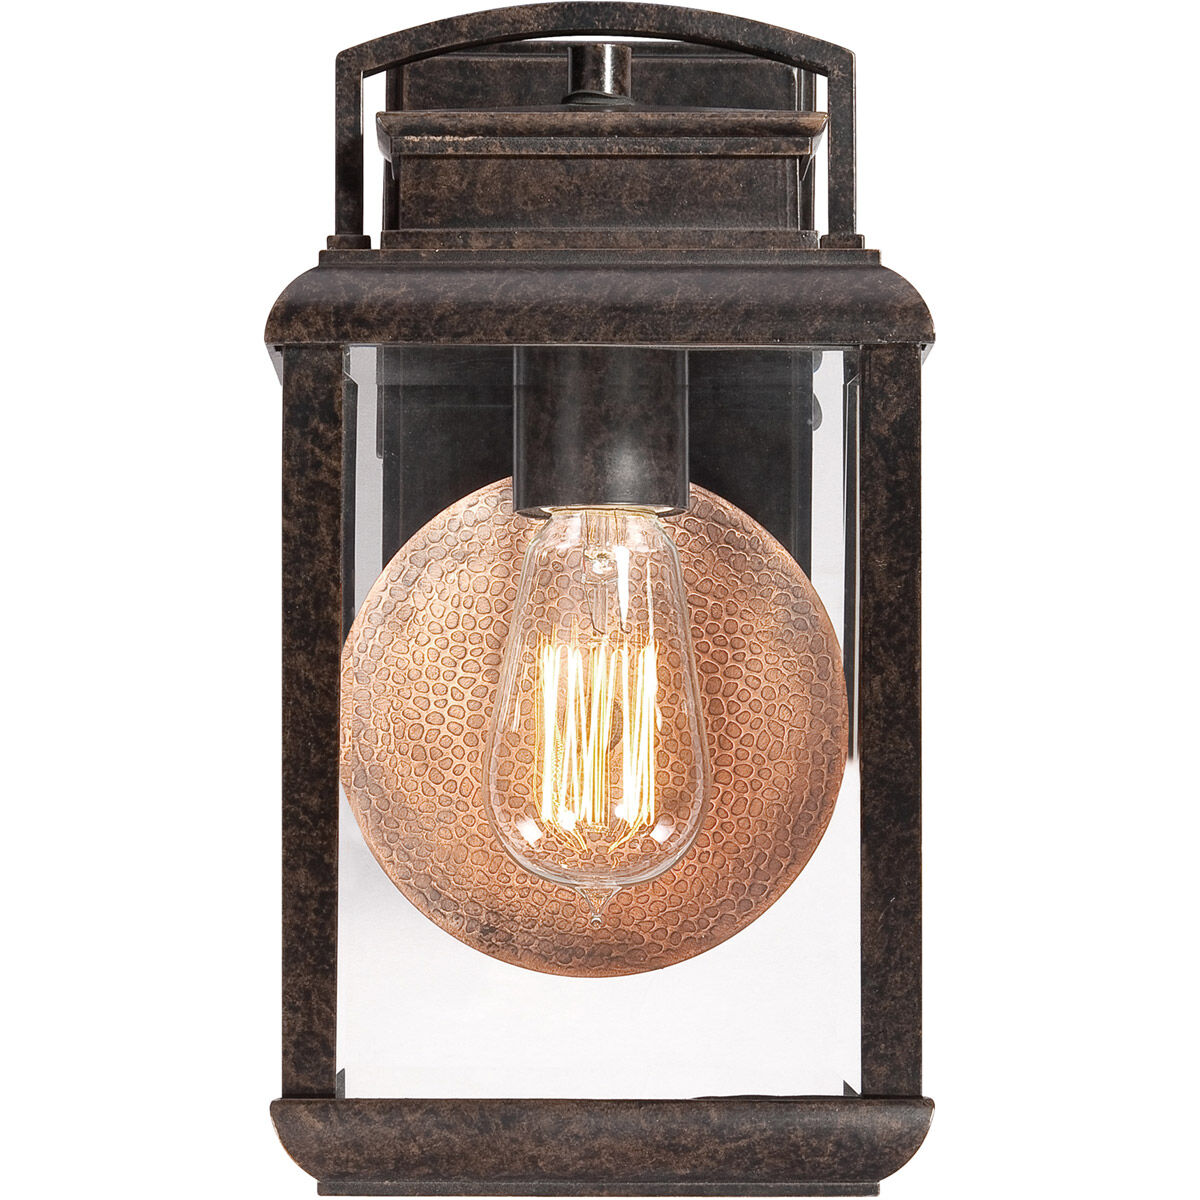 Quoizel Lighting Byron 1 Light Outdoor Wall Lantern in Imperial